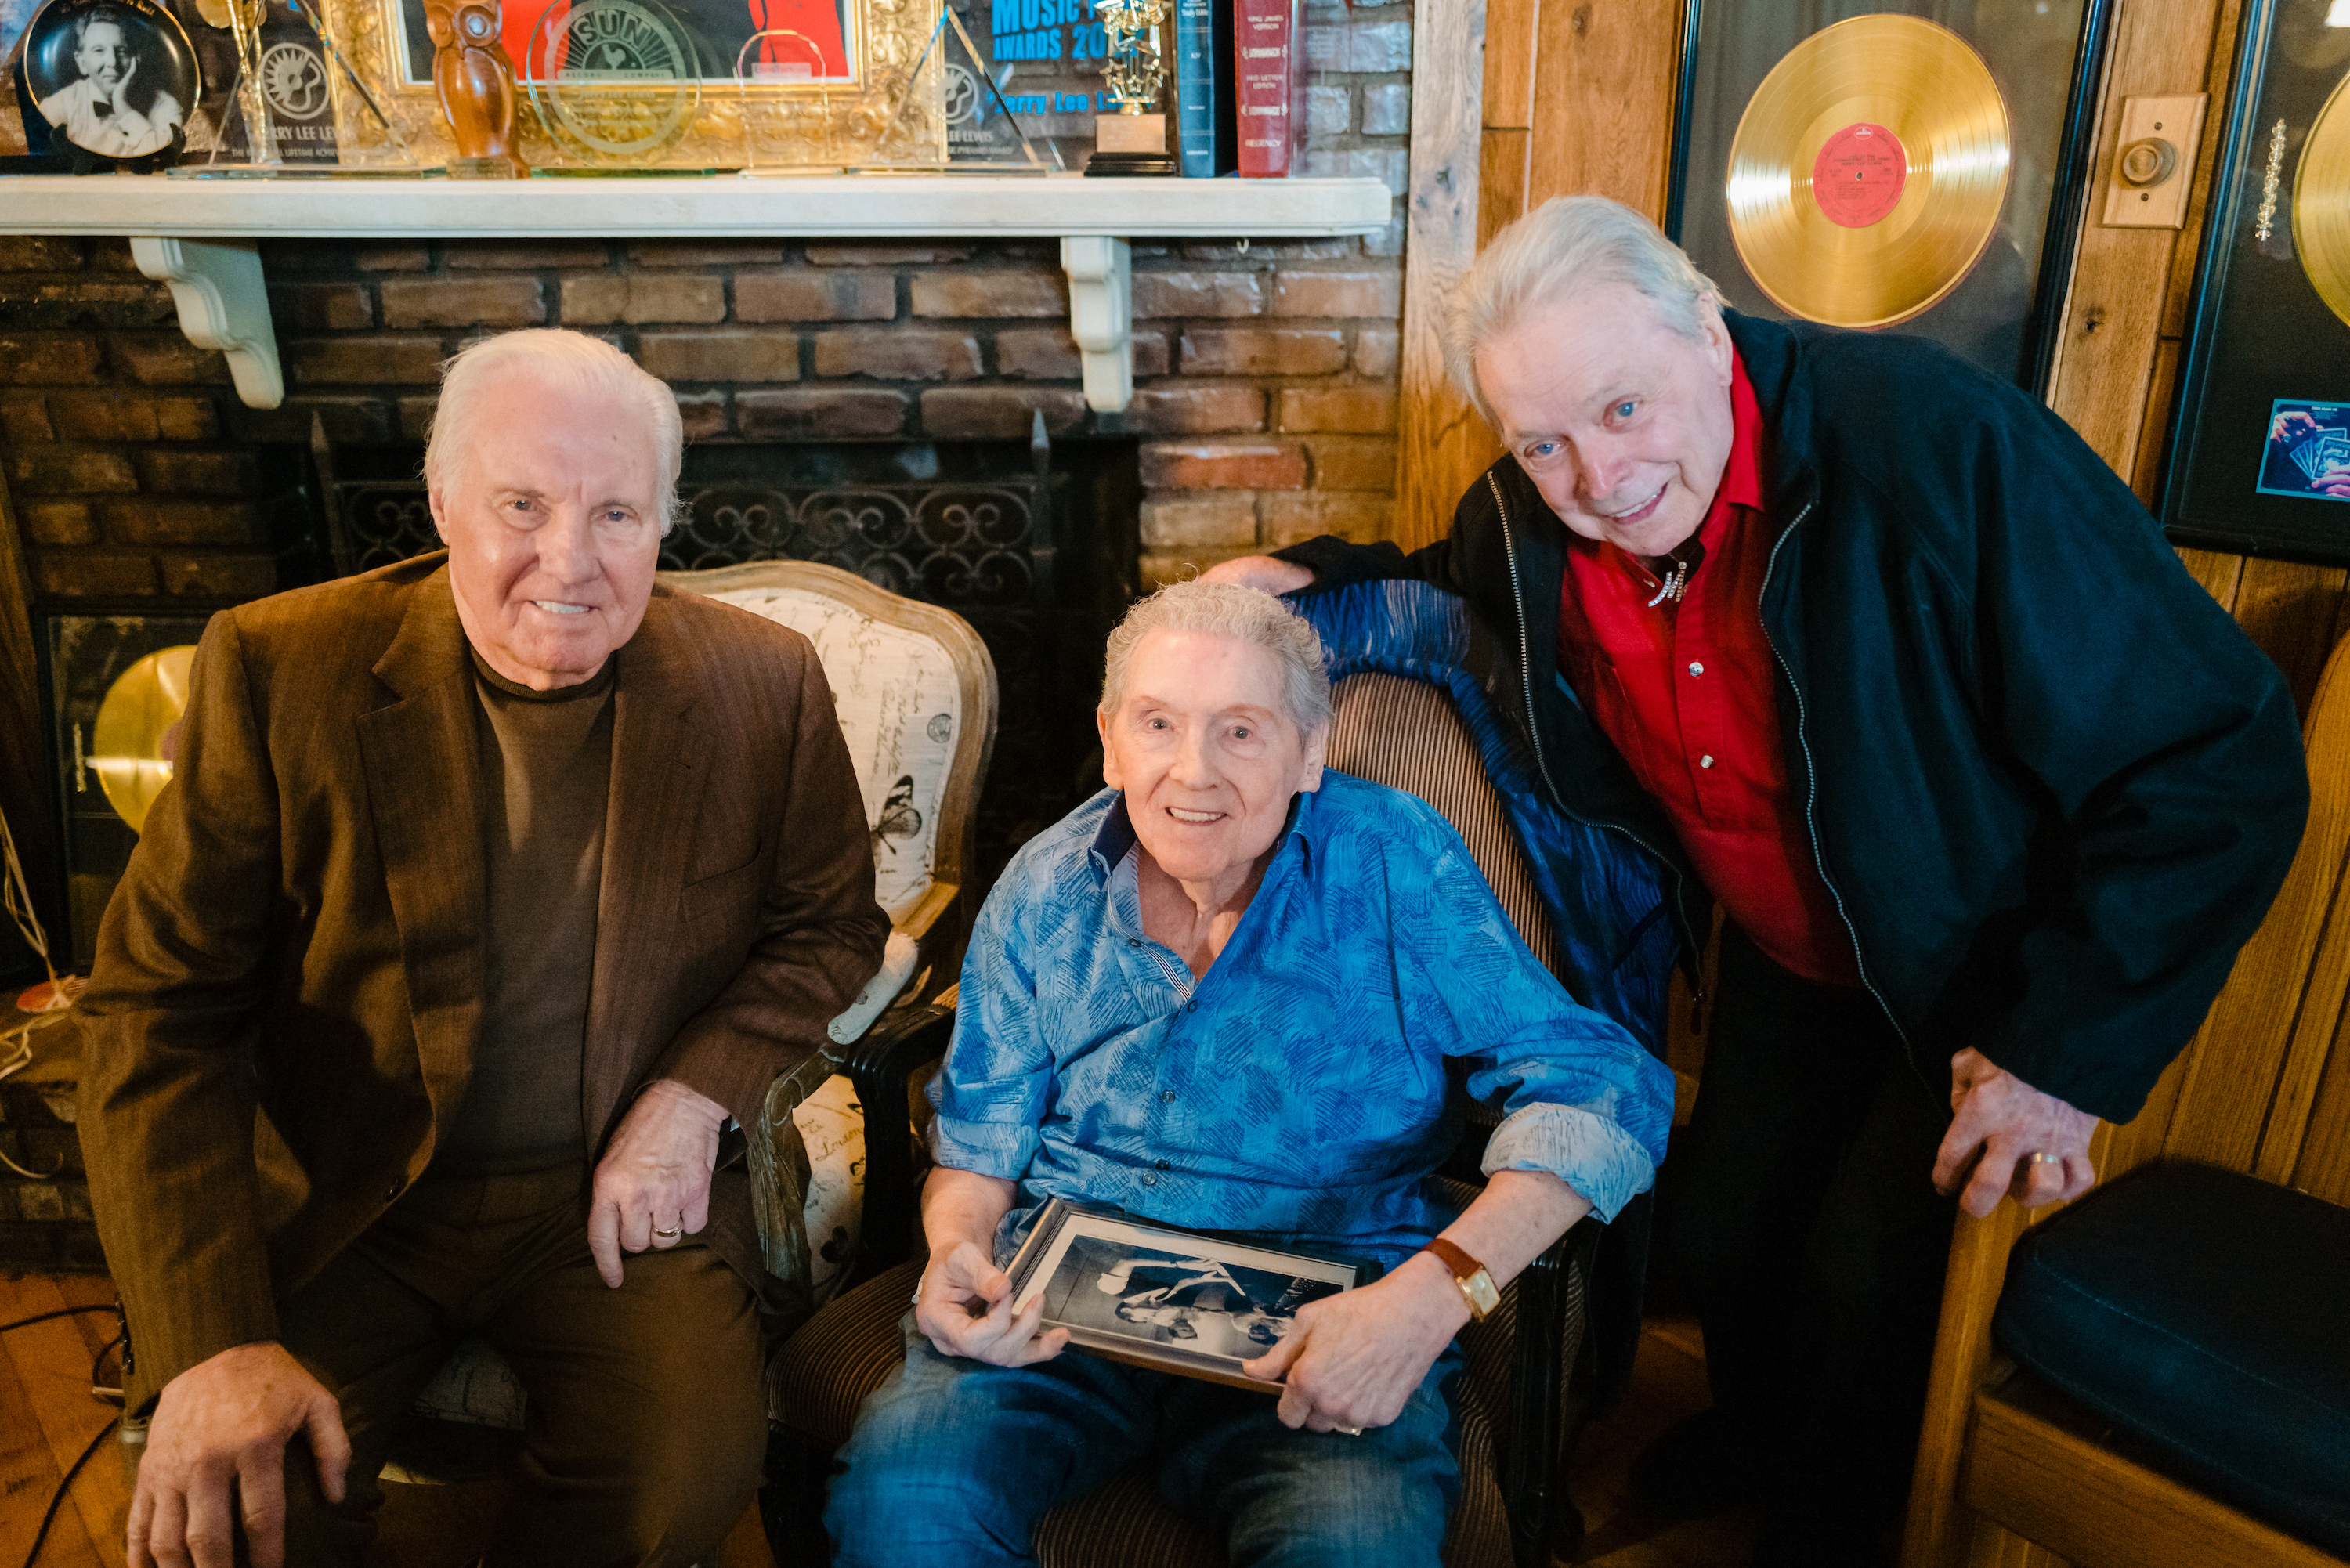 Jerry Lee Lewis, Irving Azoff and More Remember Mickey Gilley